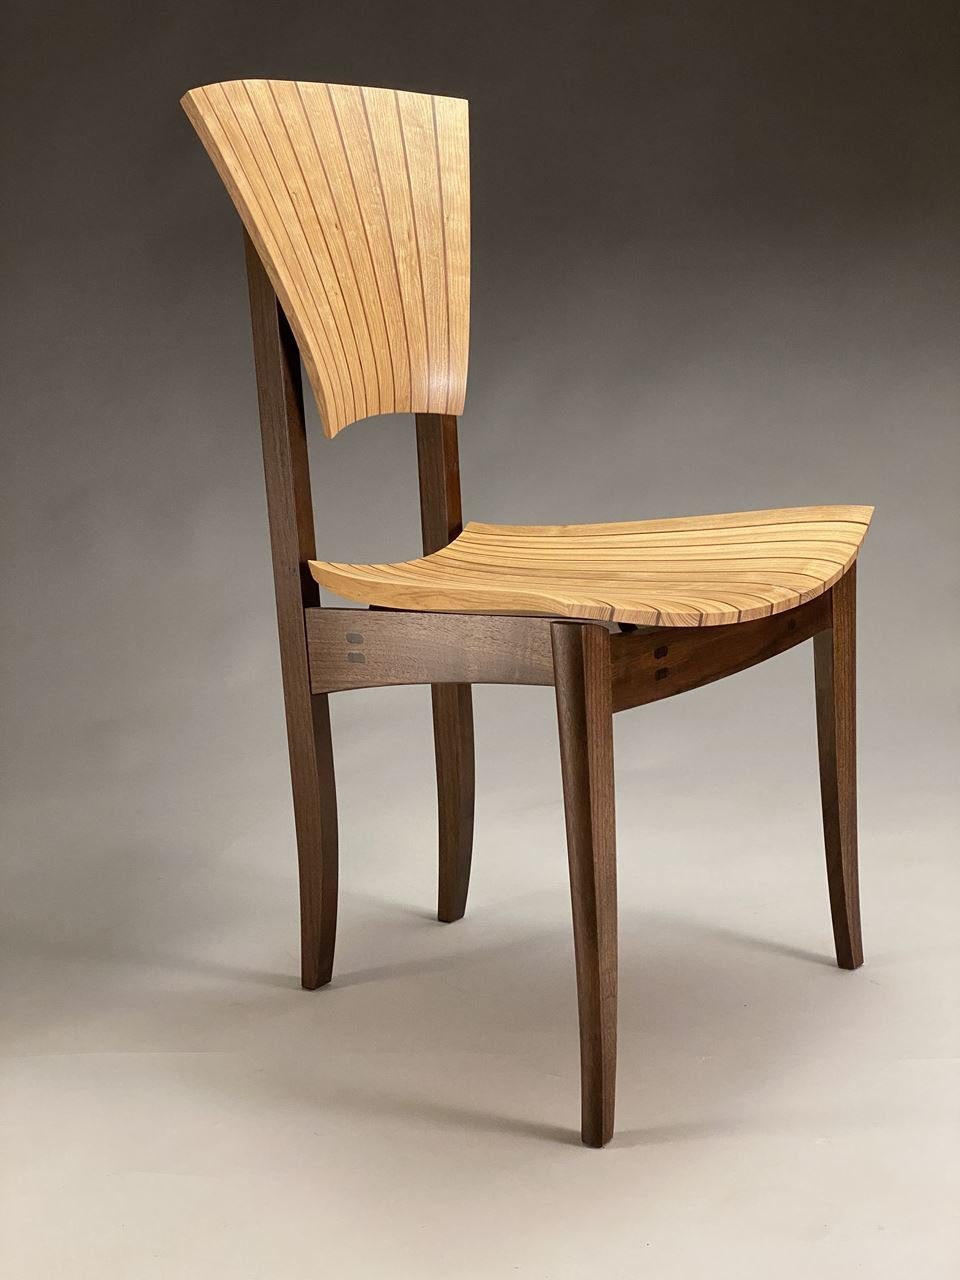 Michael Fortune Number 9 Chair Side Perspective View.jpg